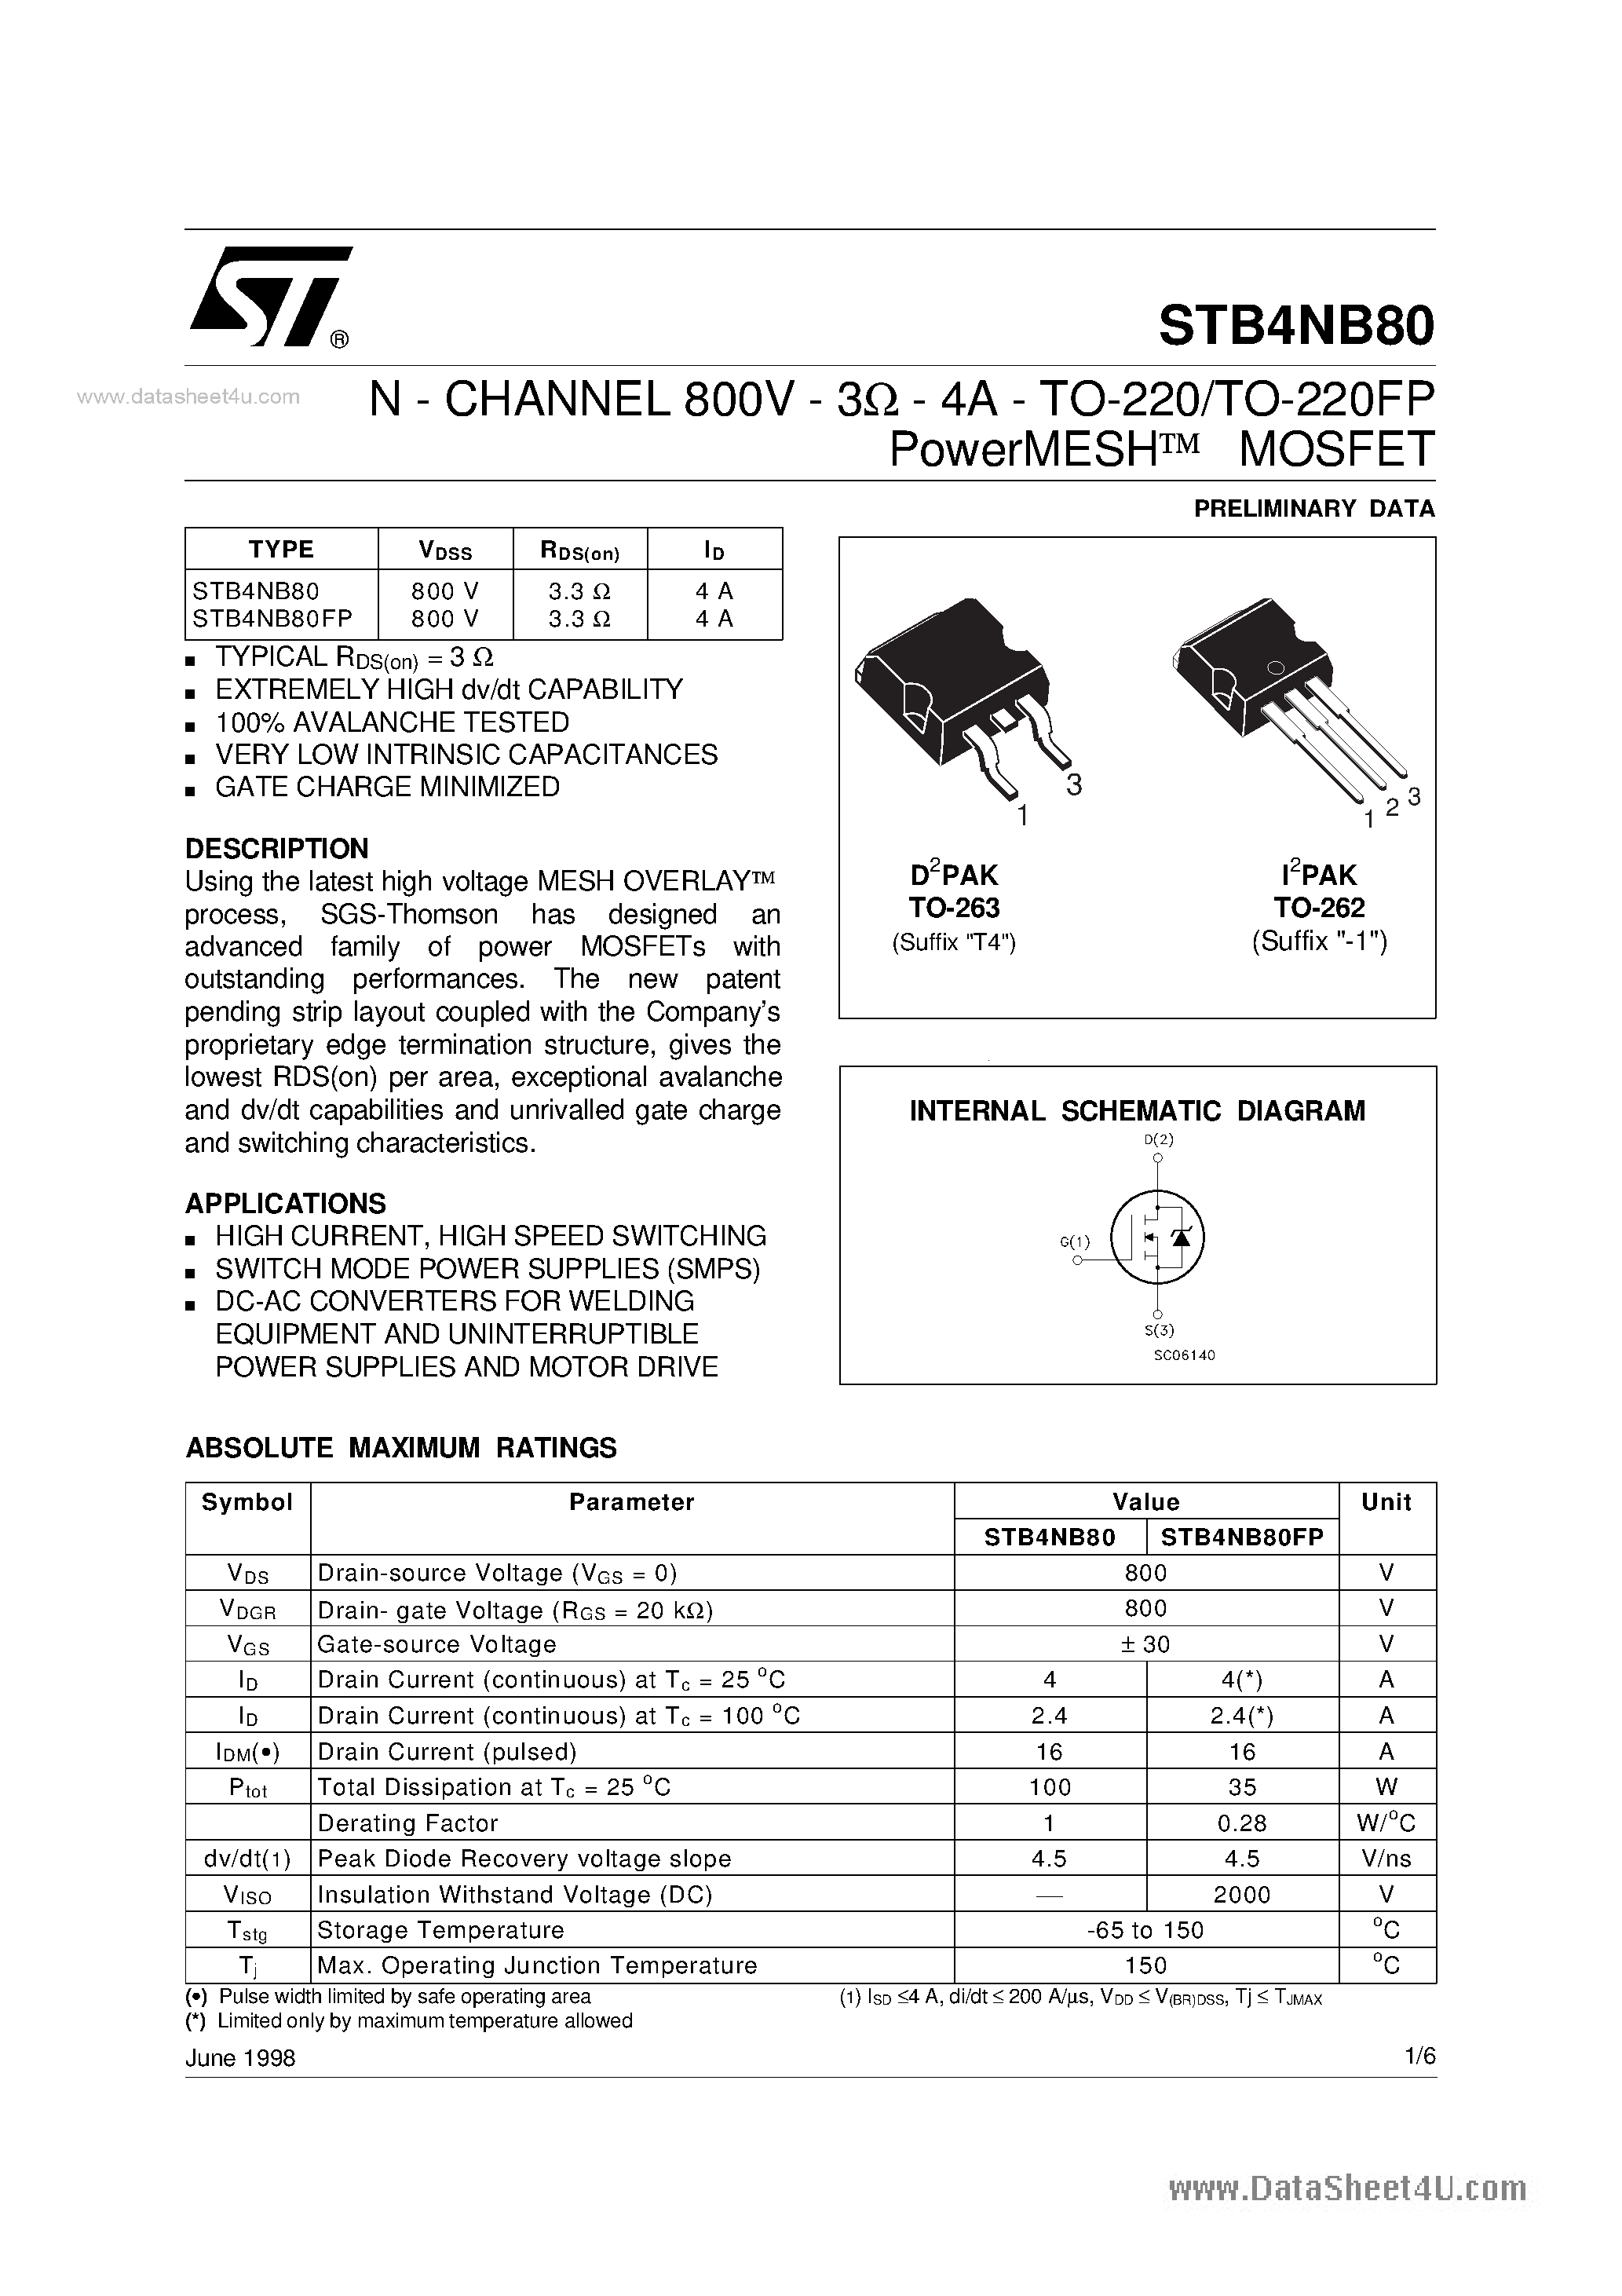 Datasheet 4NB80 - Search -----> ST4NB80 page 1